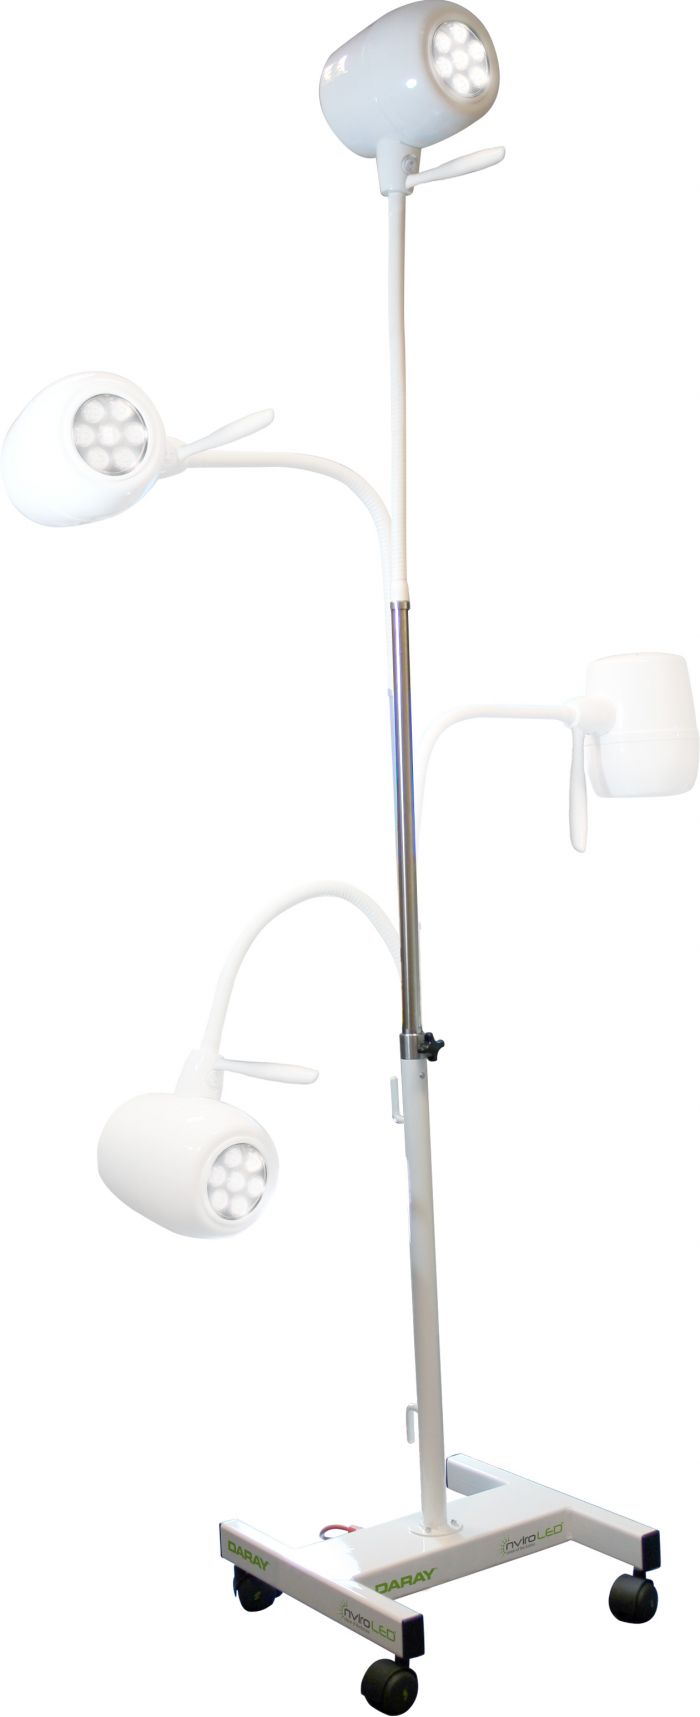 Daray X400 LED Examination Light - Mobile Mounted with Flexible Goose Neck & Telescopic Upstand - (Single)